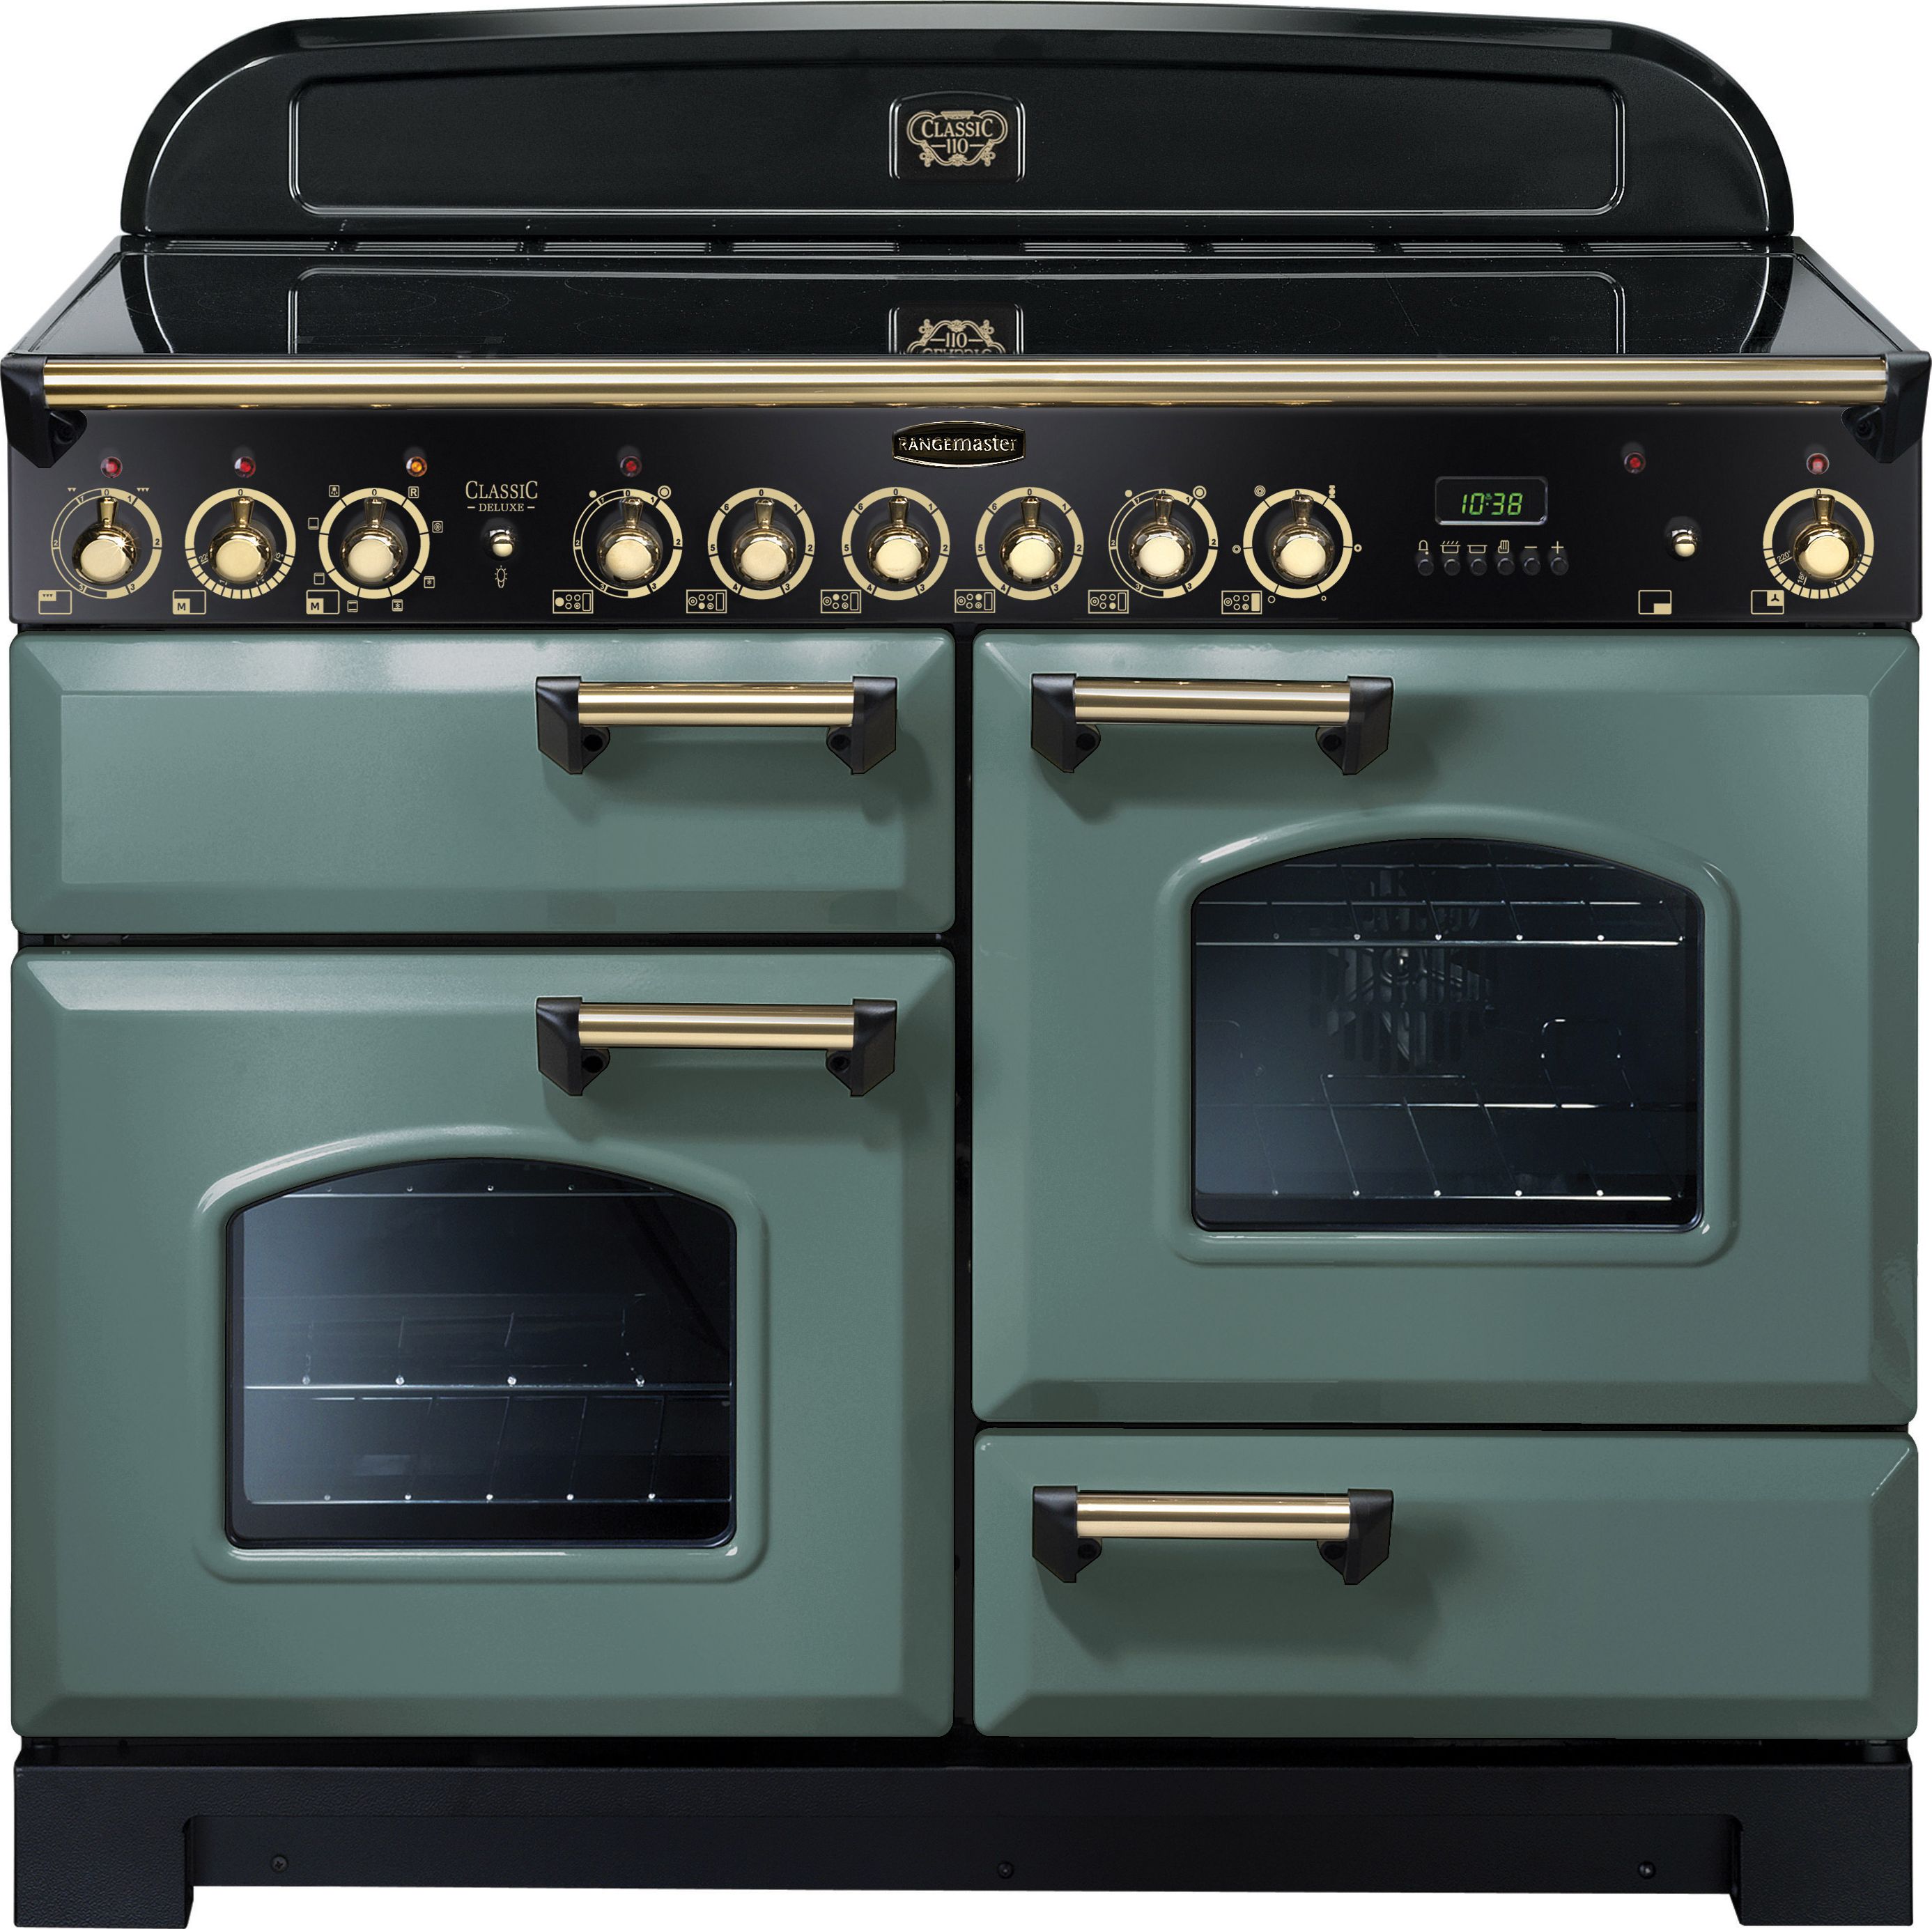 Rangemaster Classic Deluxe CDL110ECMG/B 110cm Electric Range Cooker with Ceramic Hob - Mineral Green / Brass - A/A Rated, Green